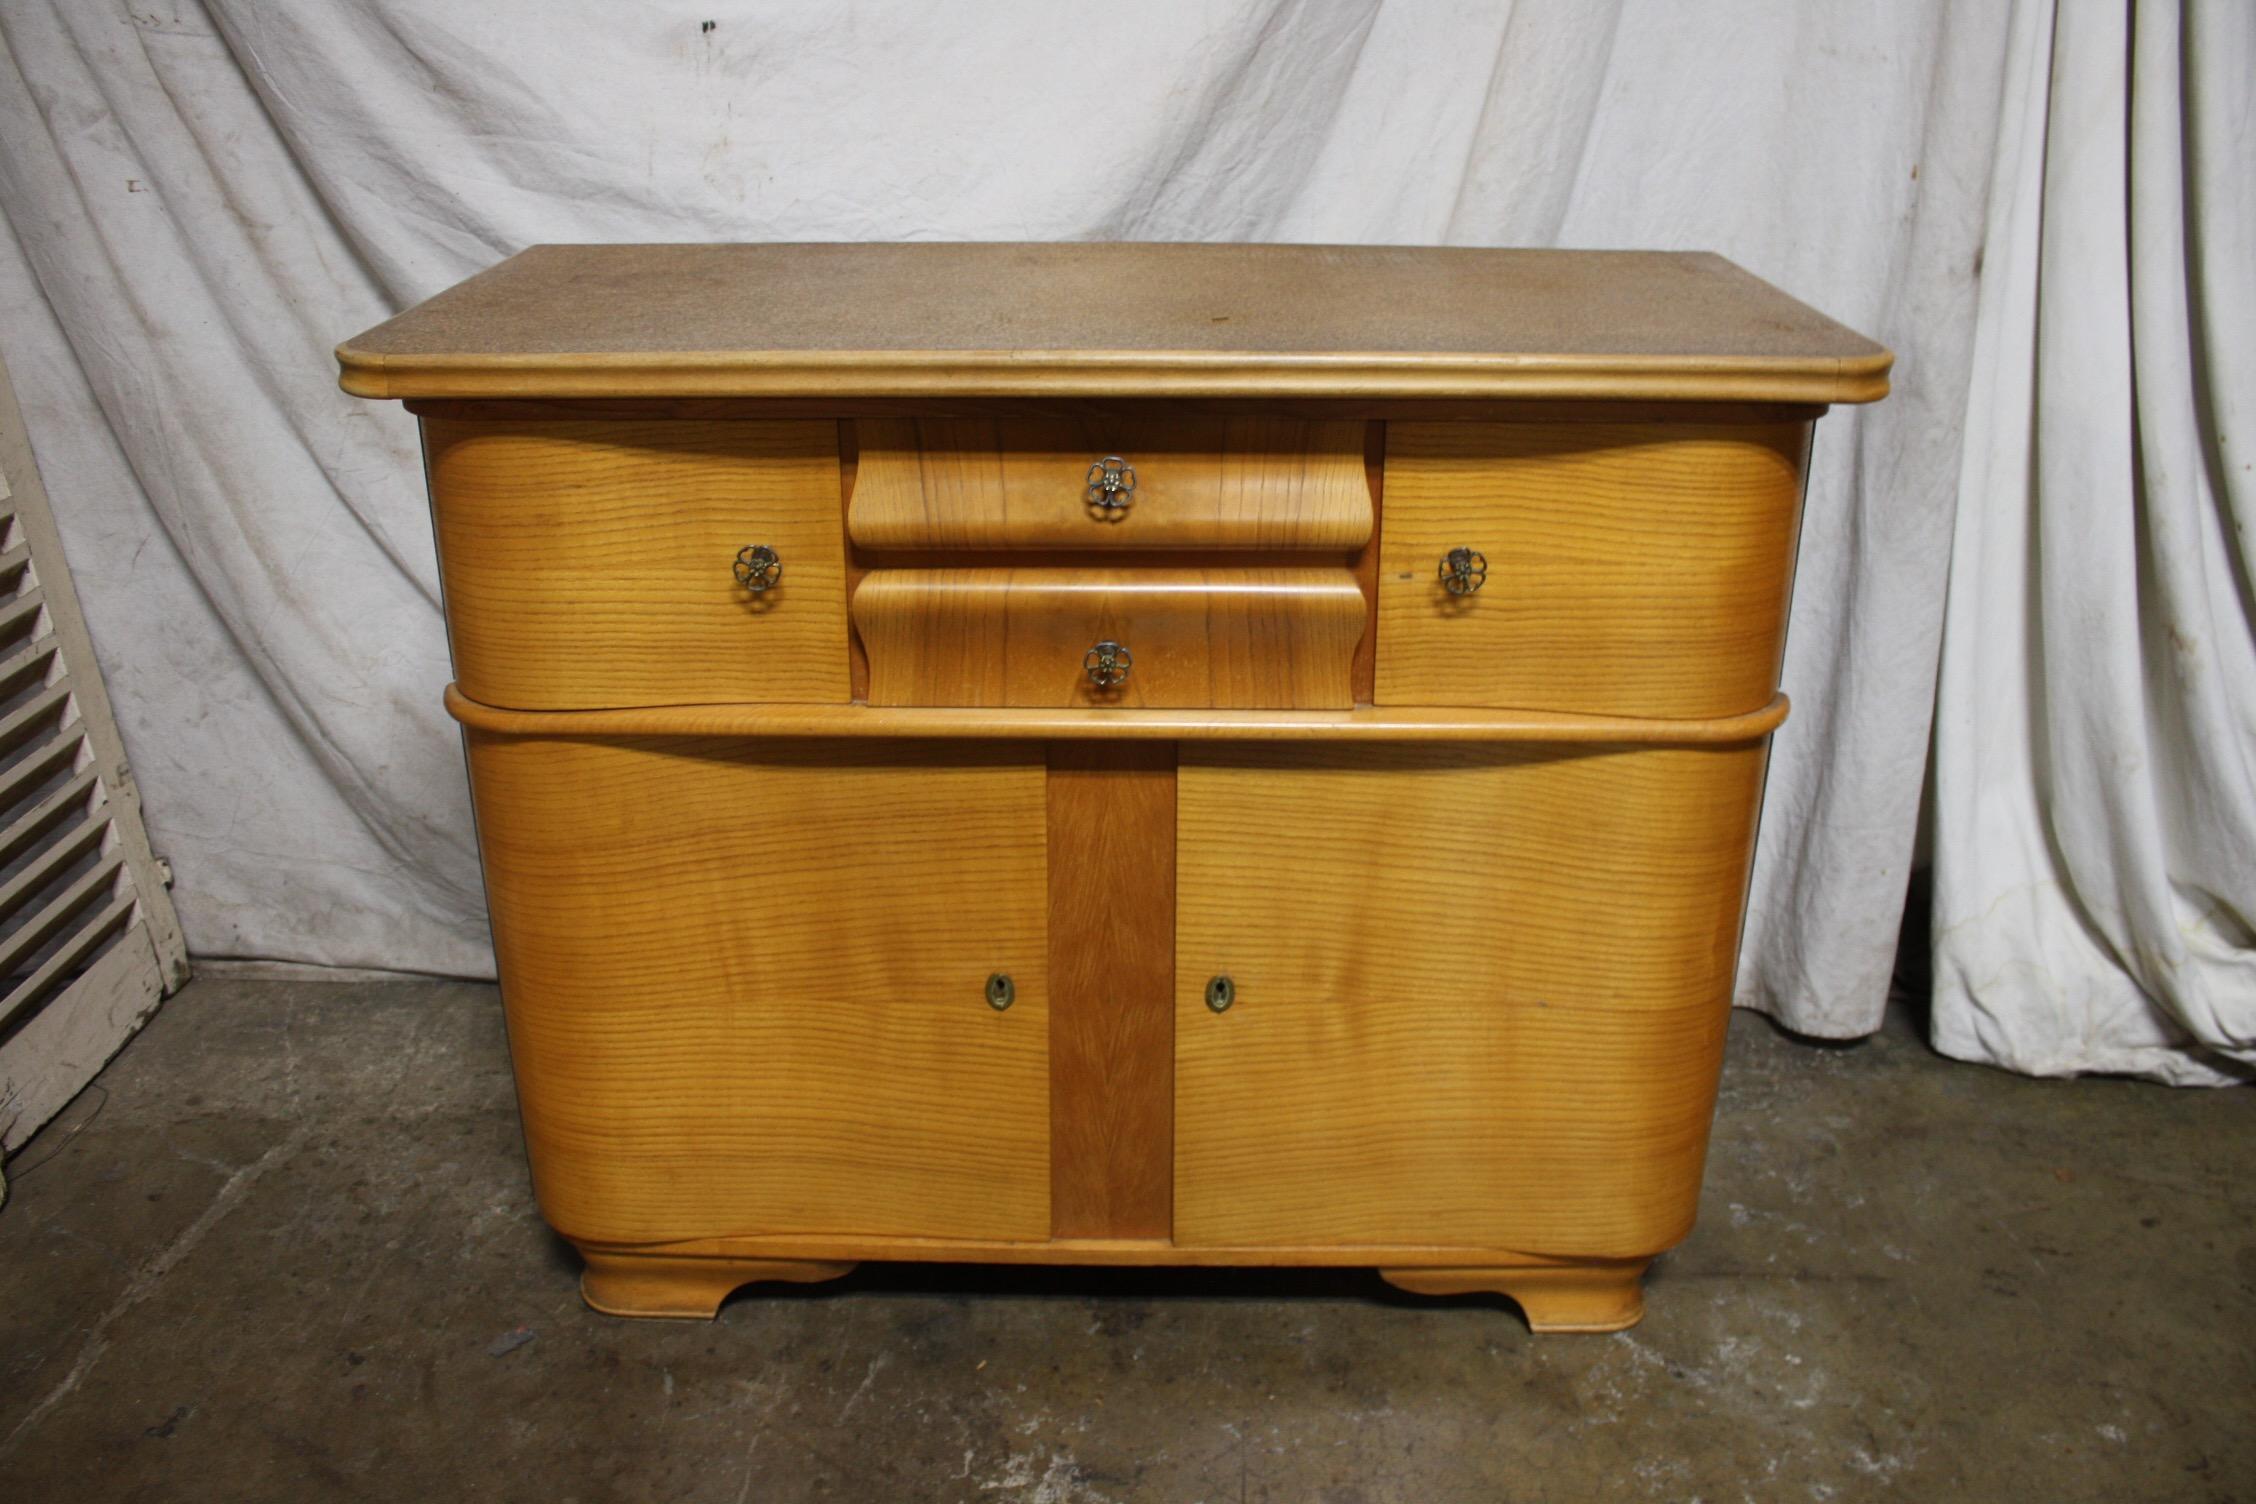 Really nice line and curve on this buffet. Beautiful wood and an interesting top too.